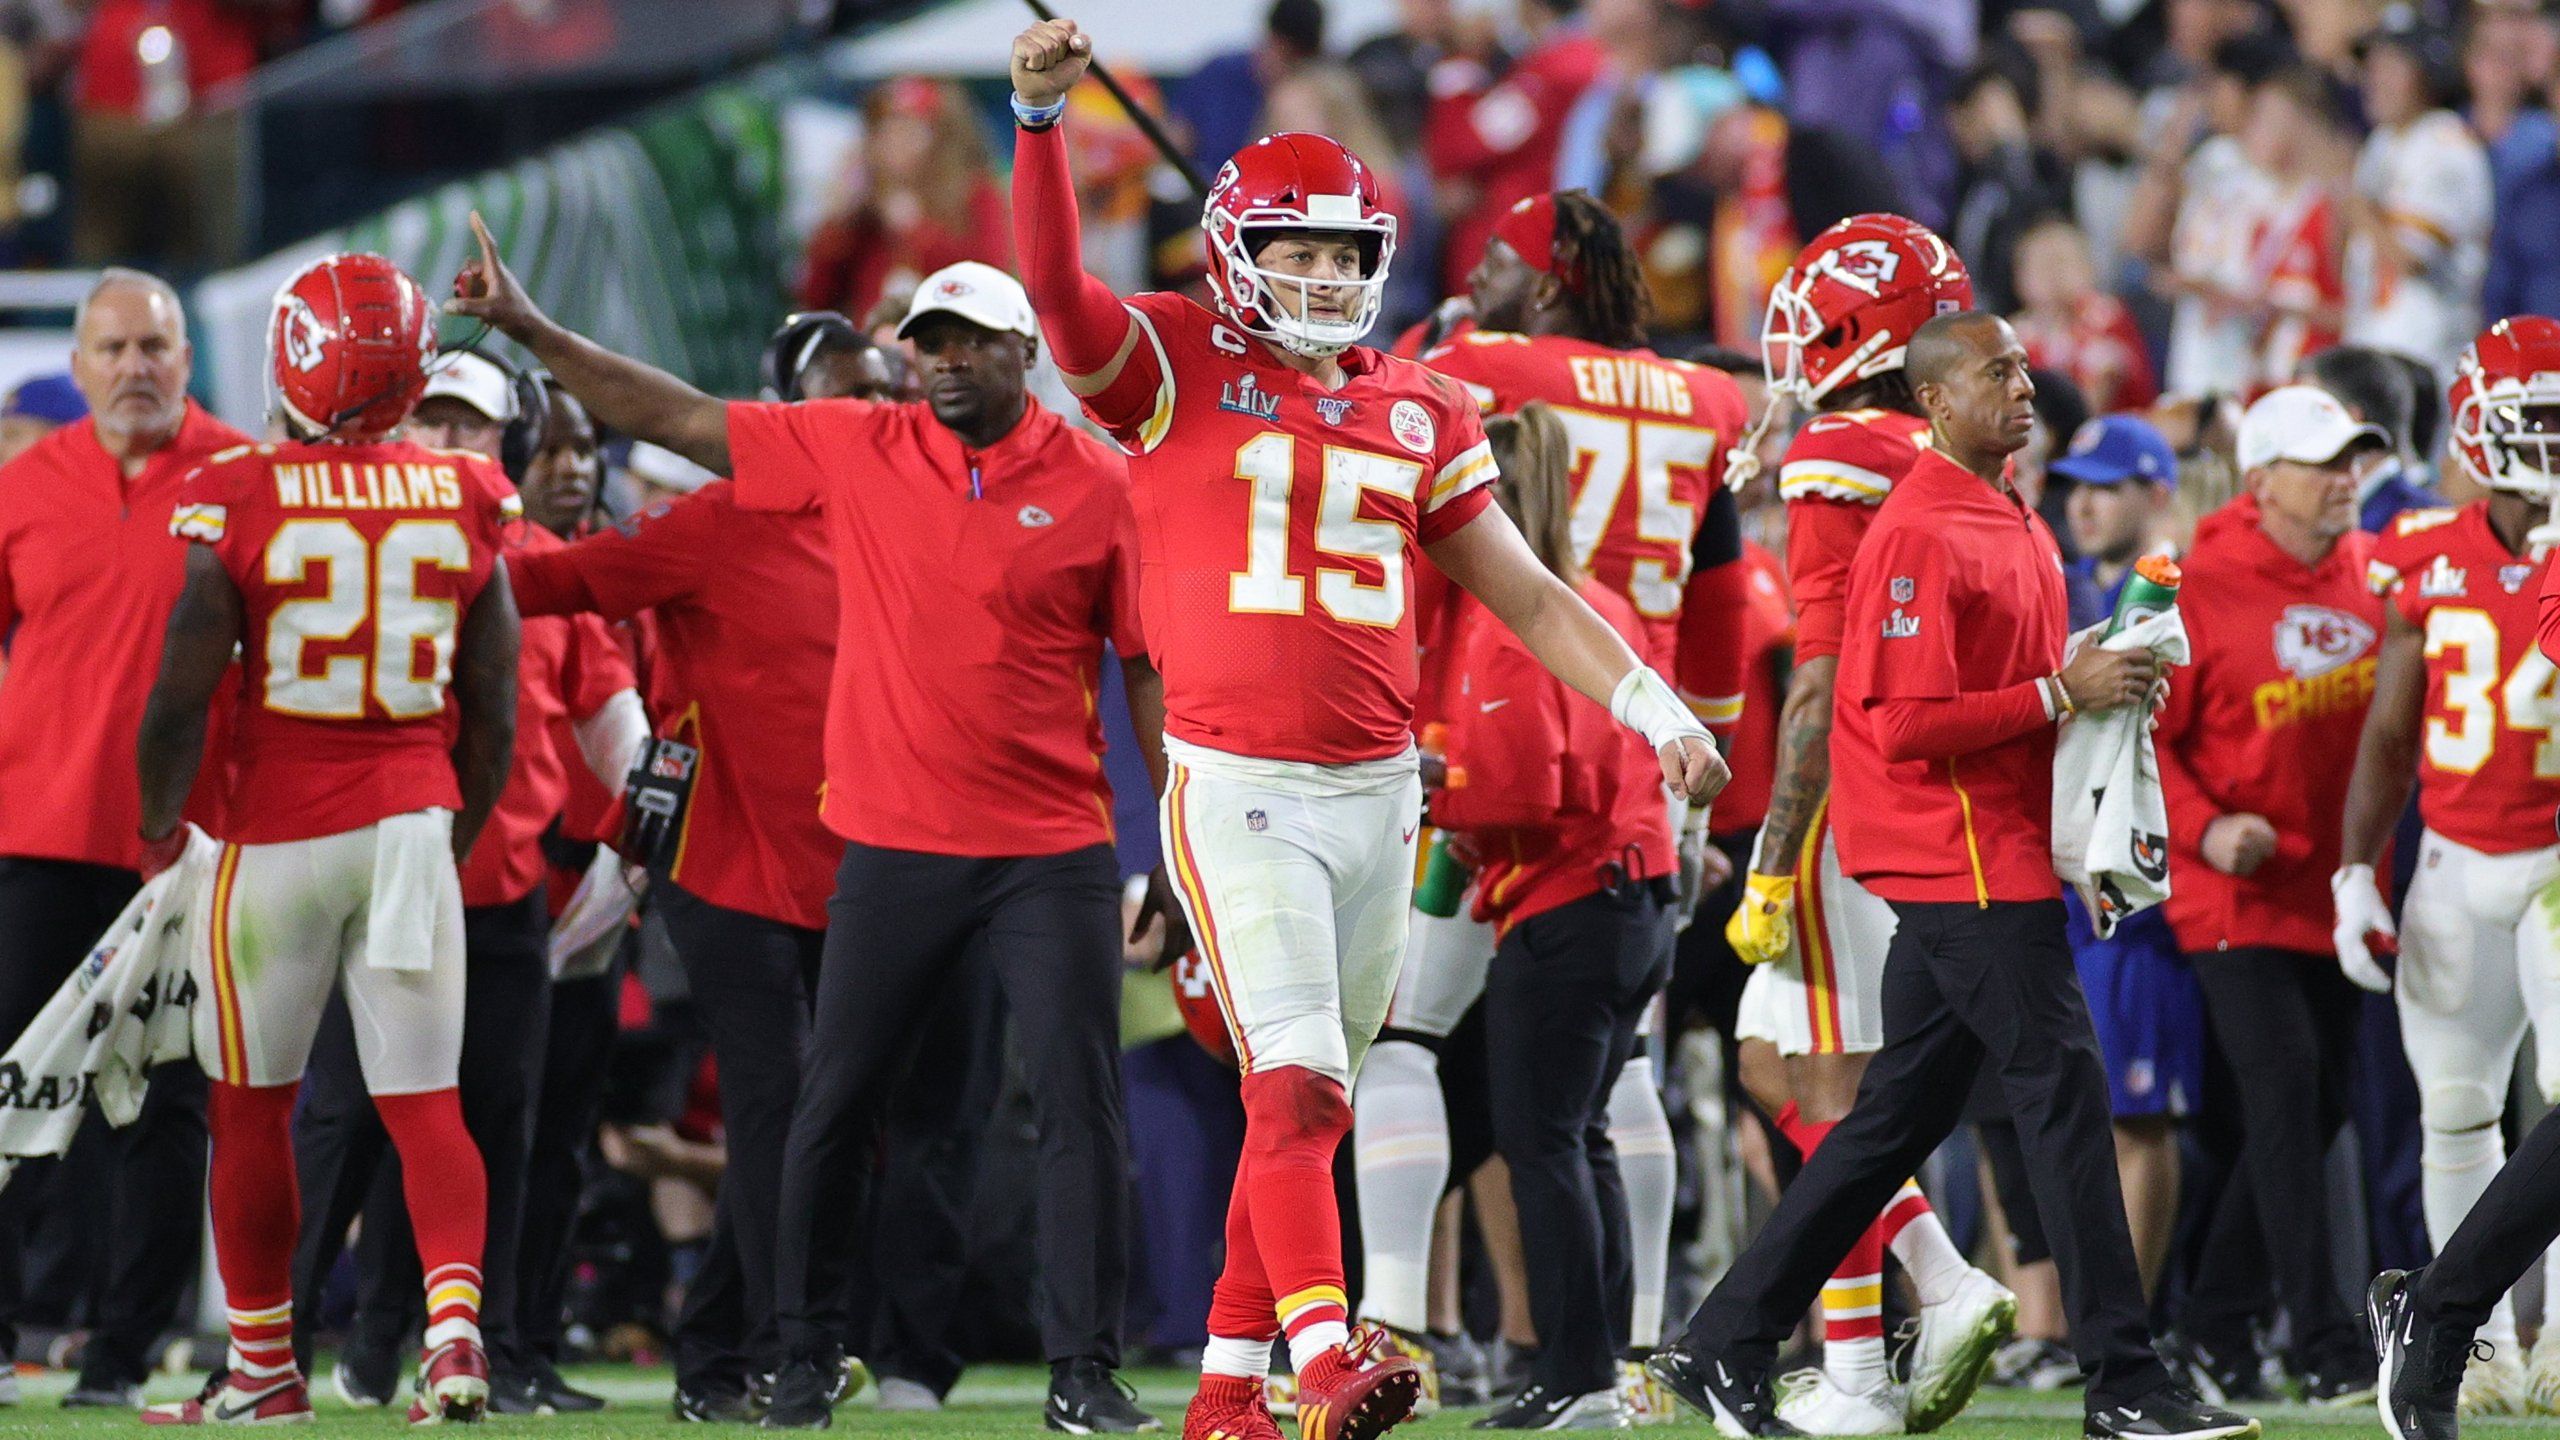 Led by Patrick Mahomes, the Kansas City Chiefs win their first Super Bowl in 50 years